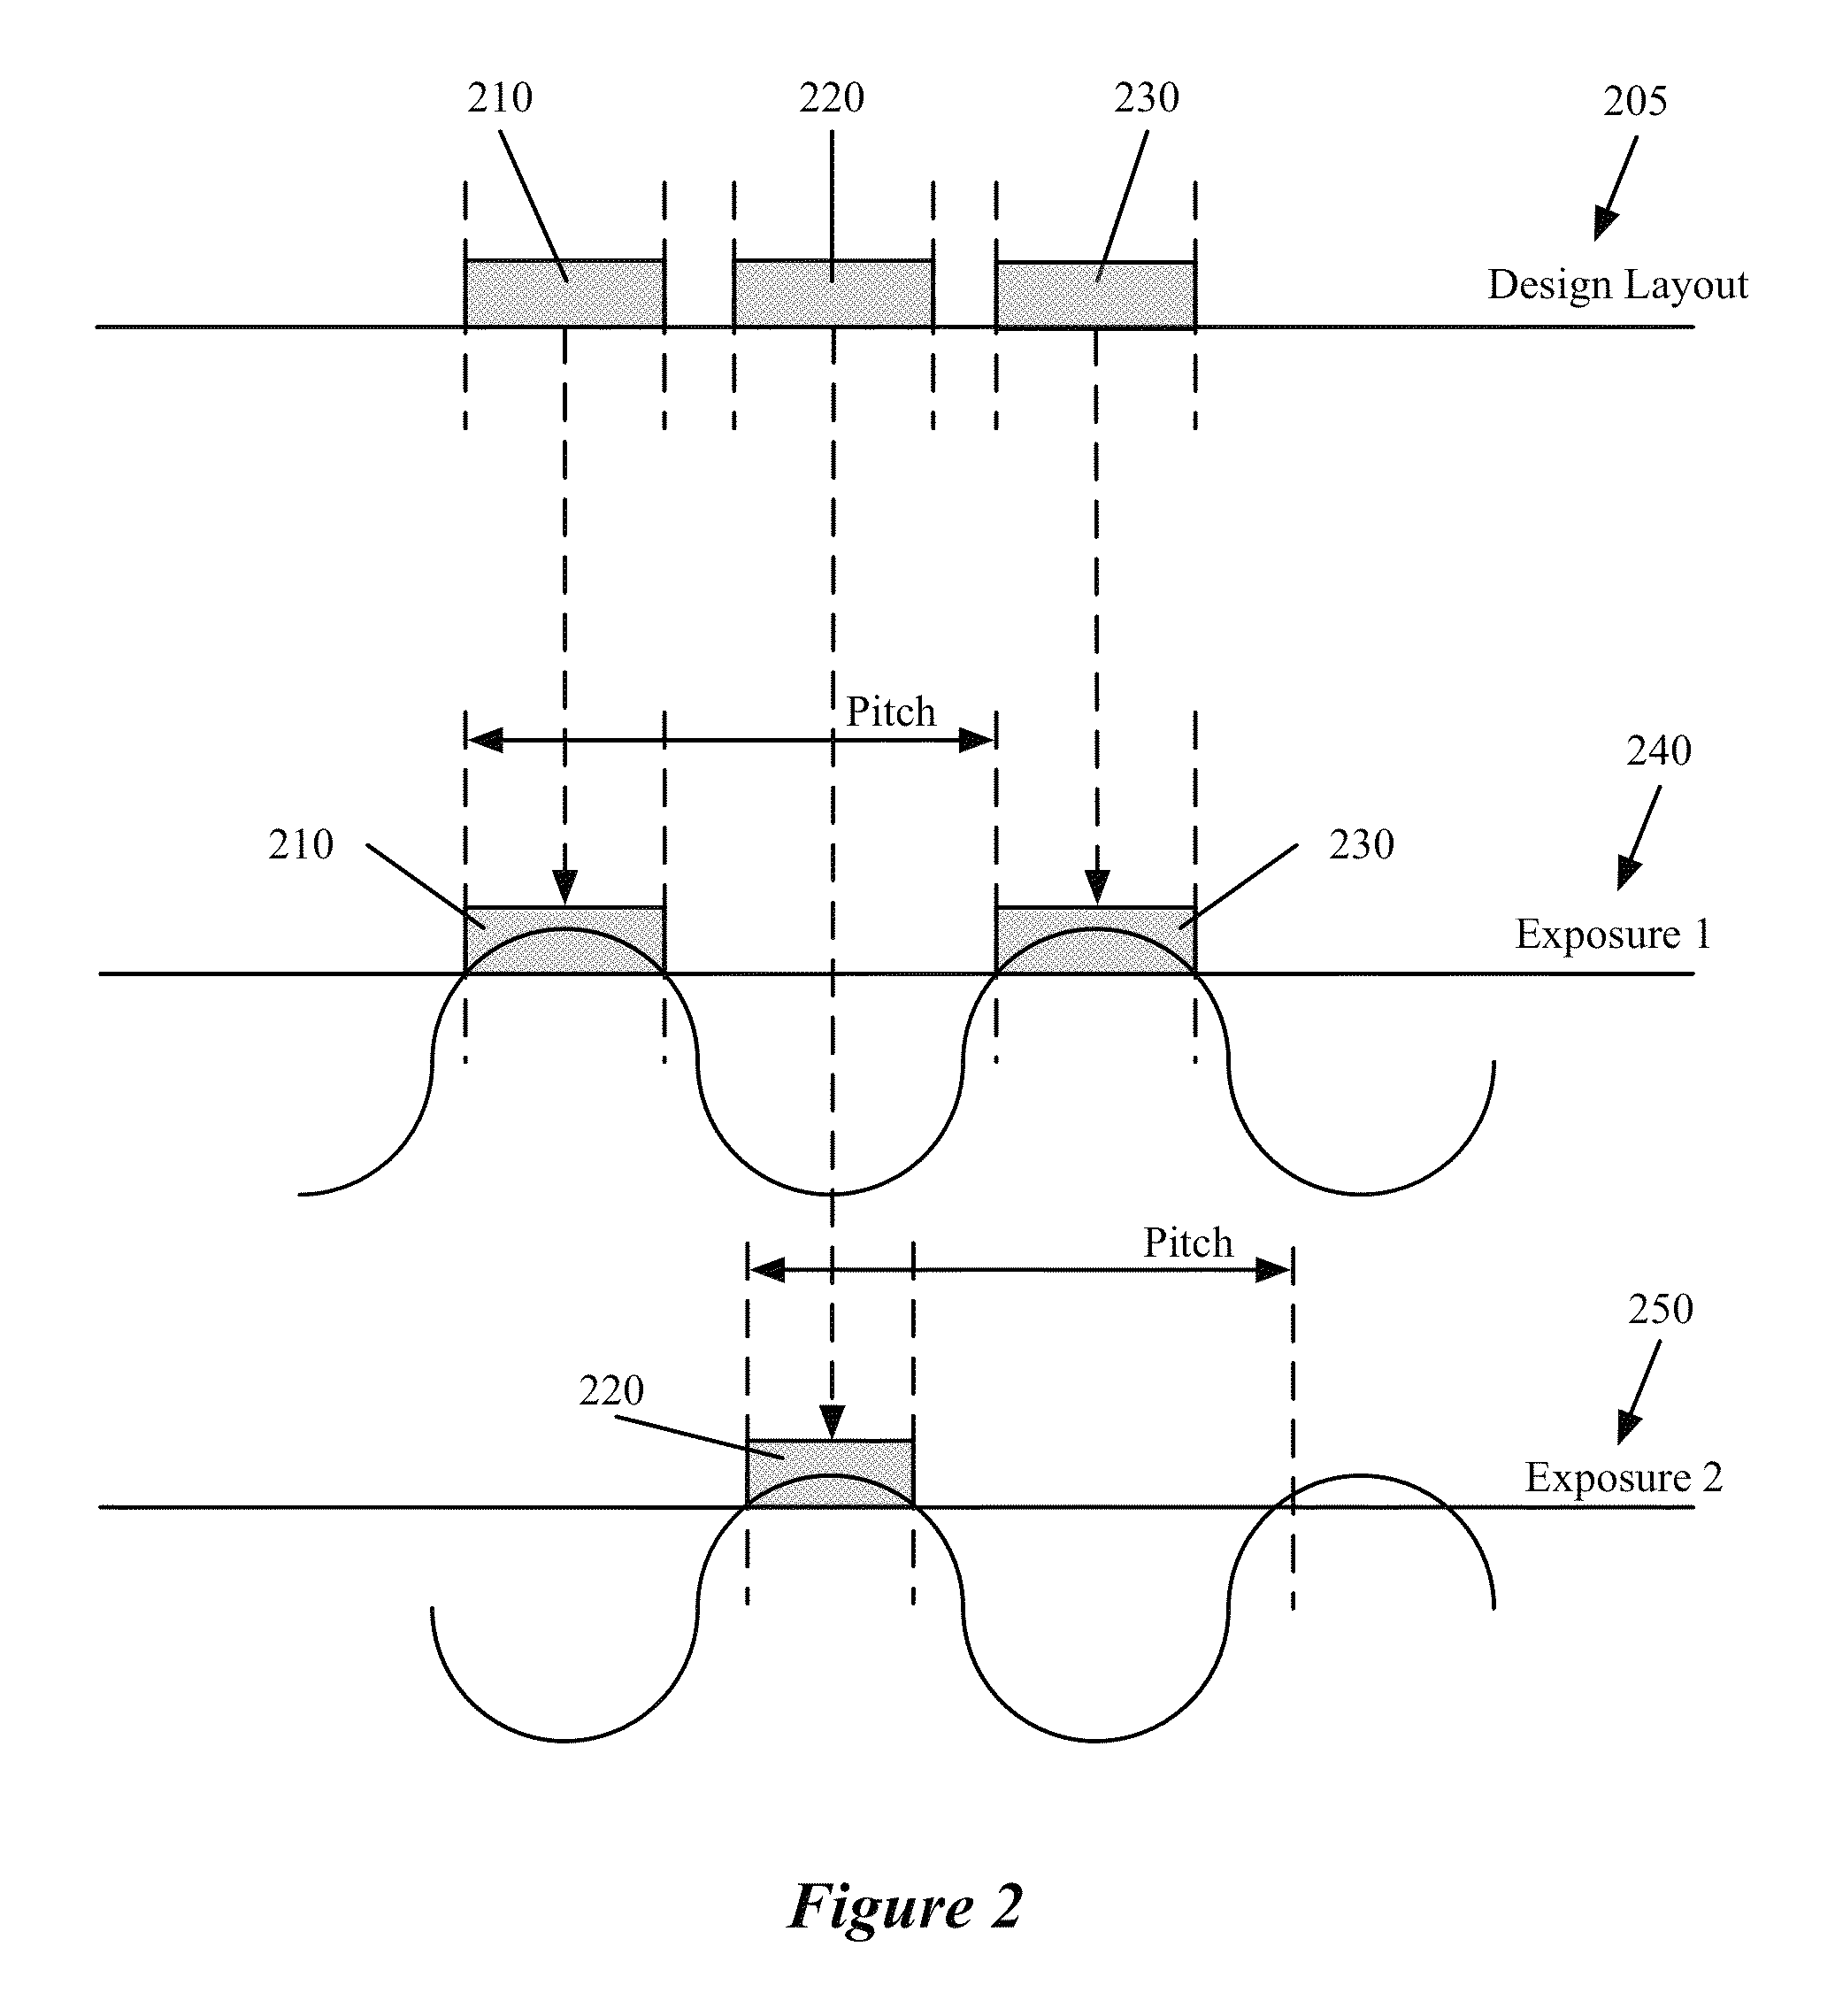 Method and apparatus for automatically fixing double patterning loop violations